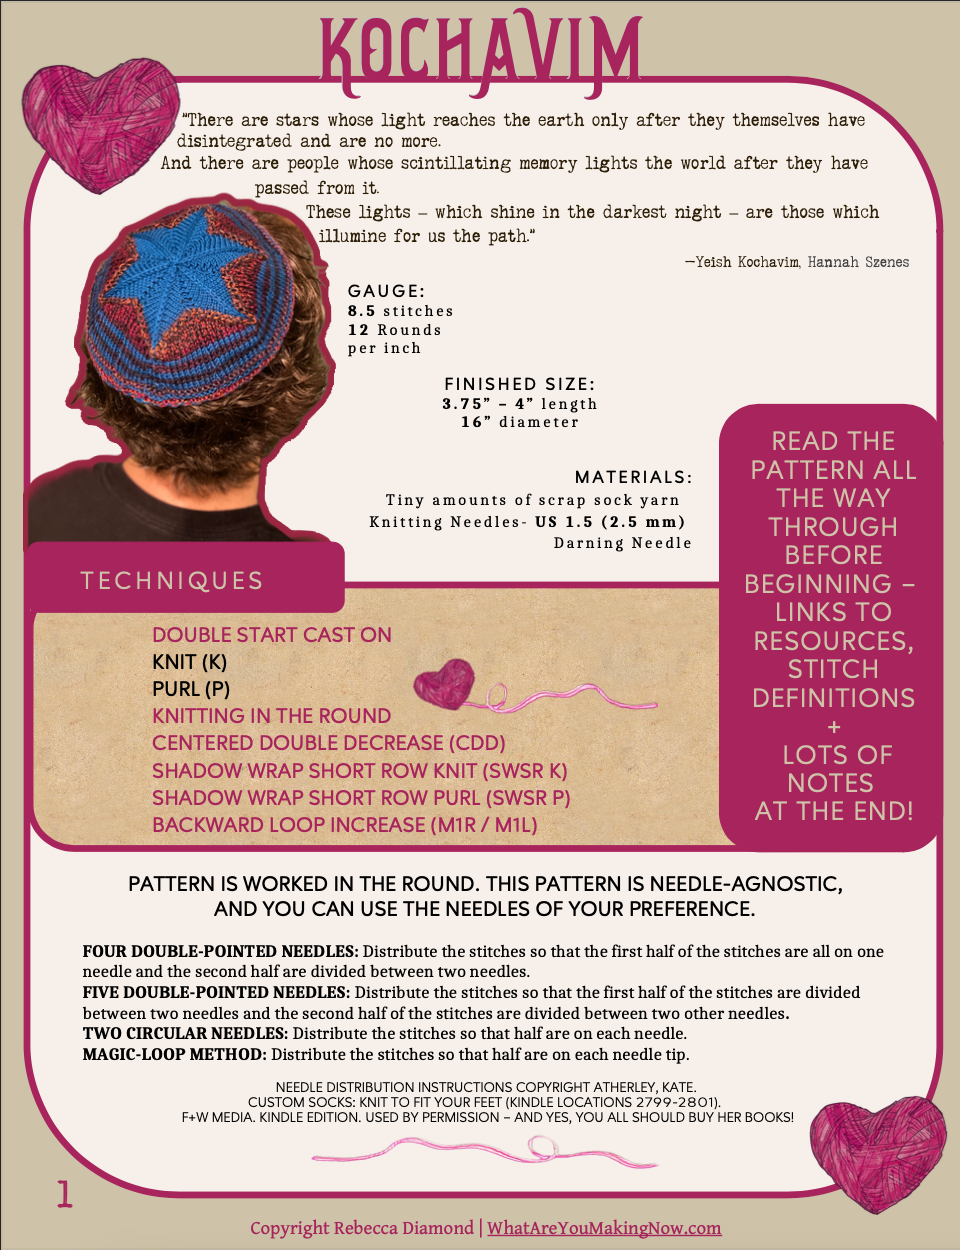 First page of the Kochavim pattern, showing a back view of a man with curly brown hair and a black shirt wearing a striped burgundy and brown kippah, with a blue star. The page layout is graphic-heavy, in pinks and browns.